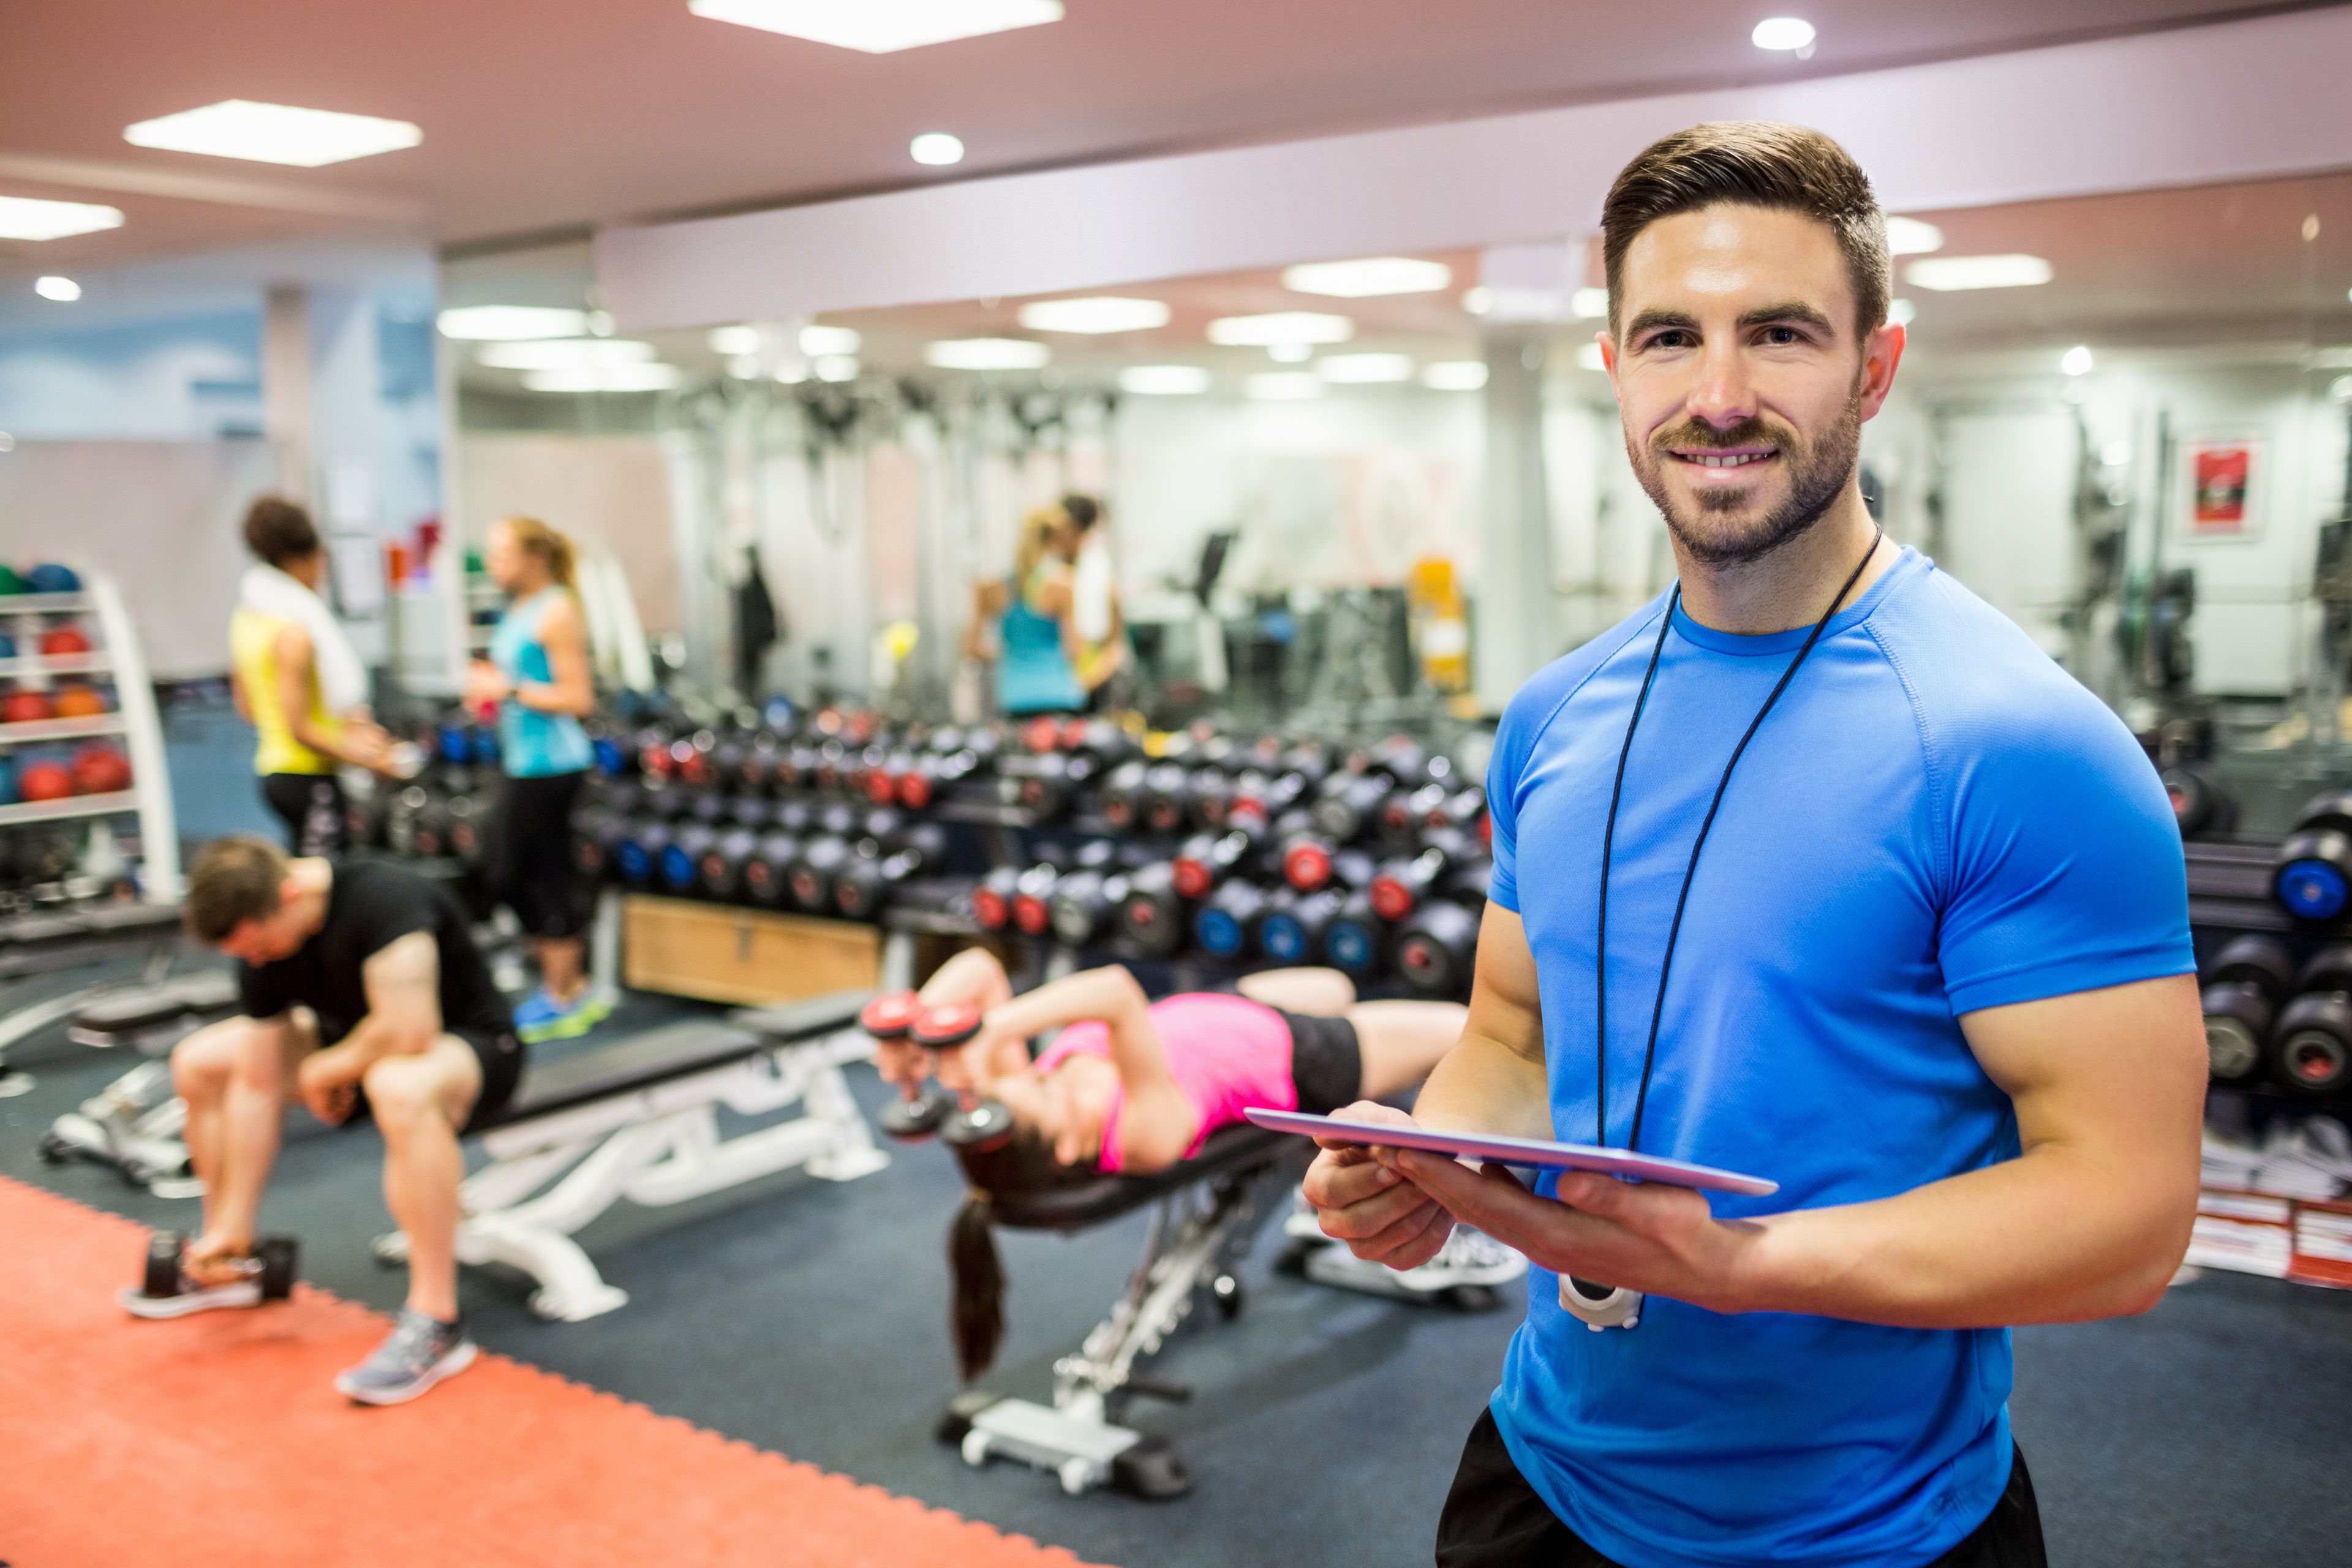 Personal Trainer in Flensburg